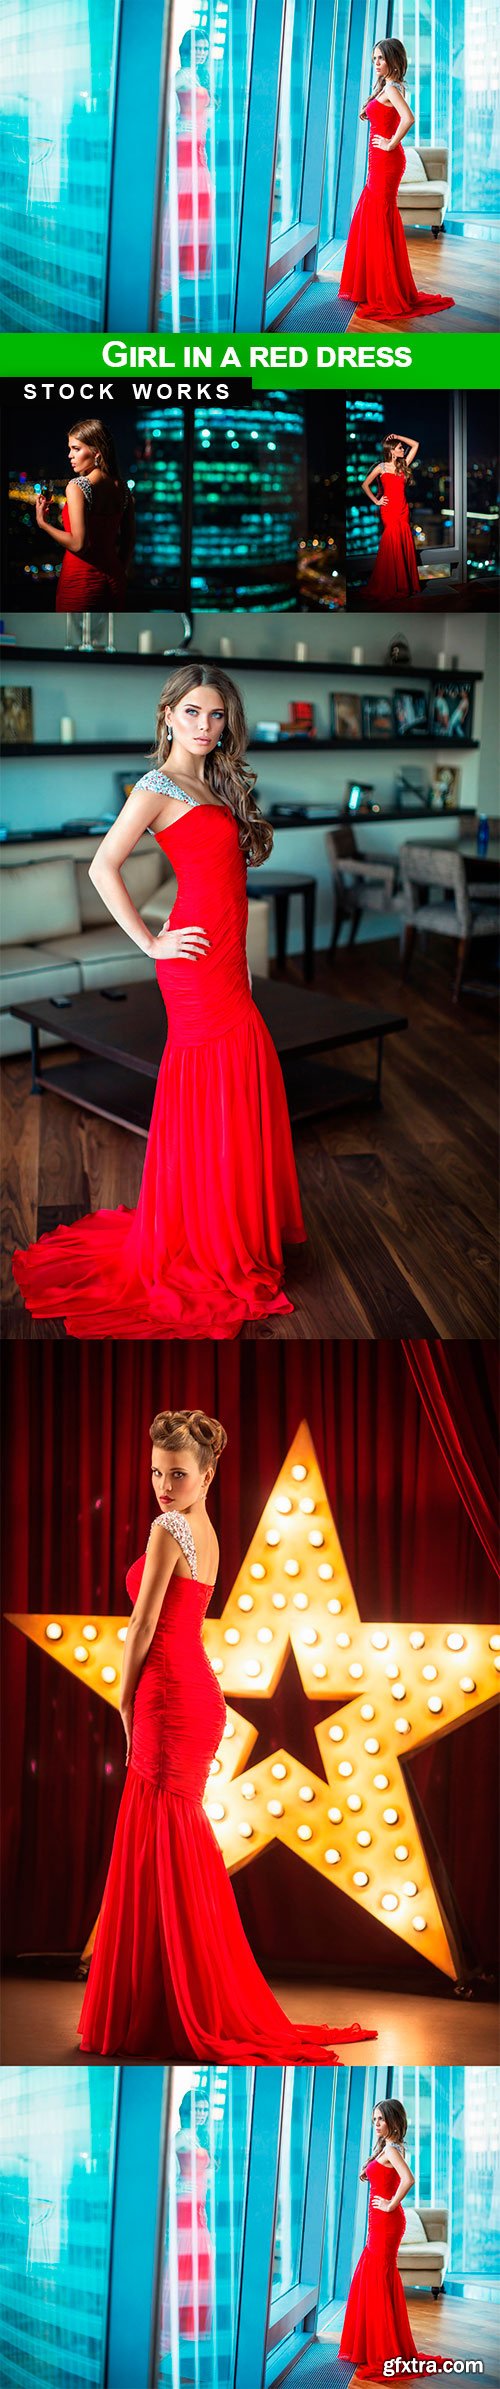 Girl in a red dress - 5 UHQ JPEG